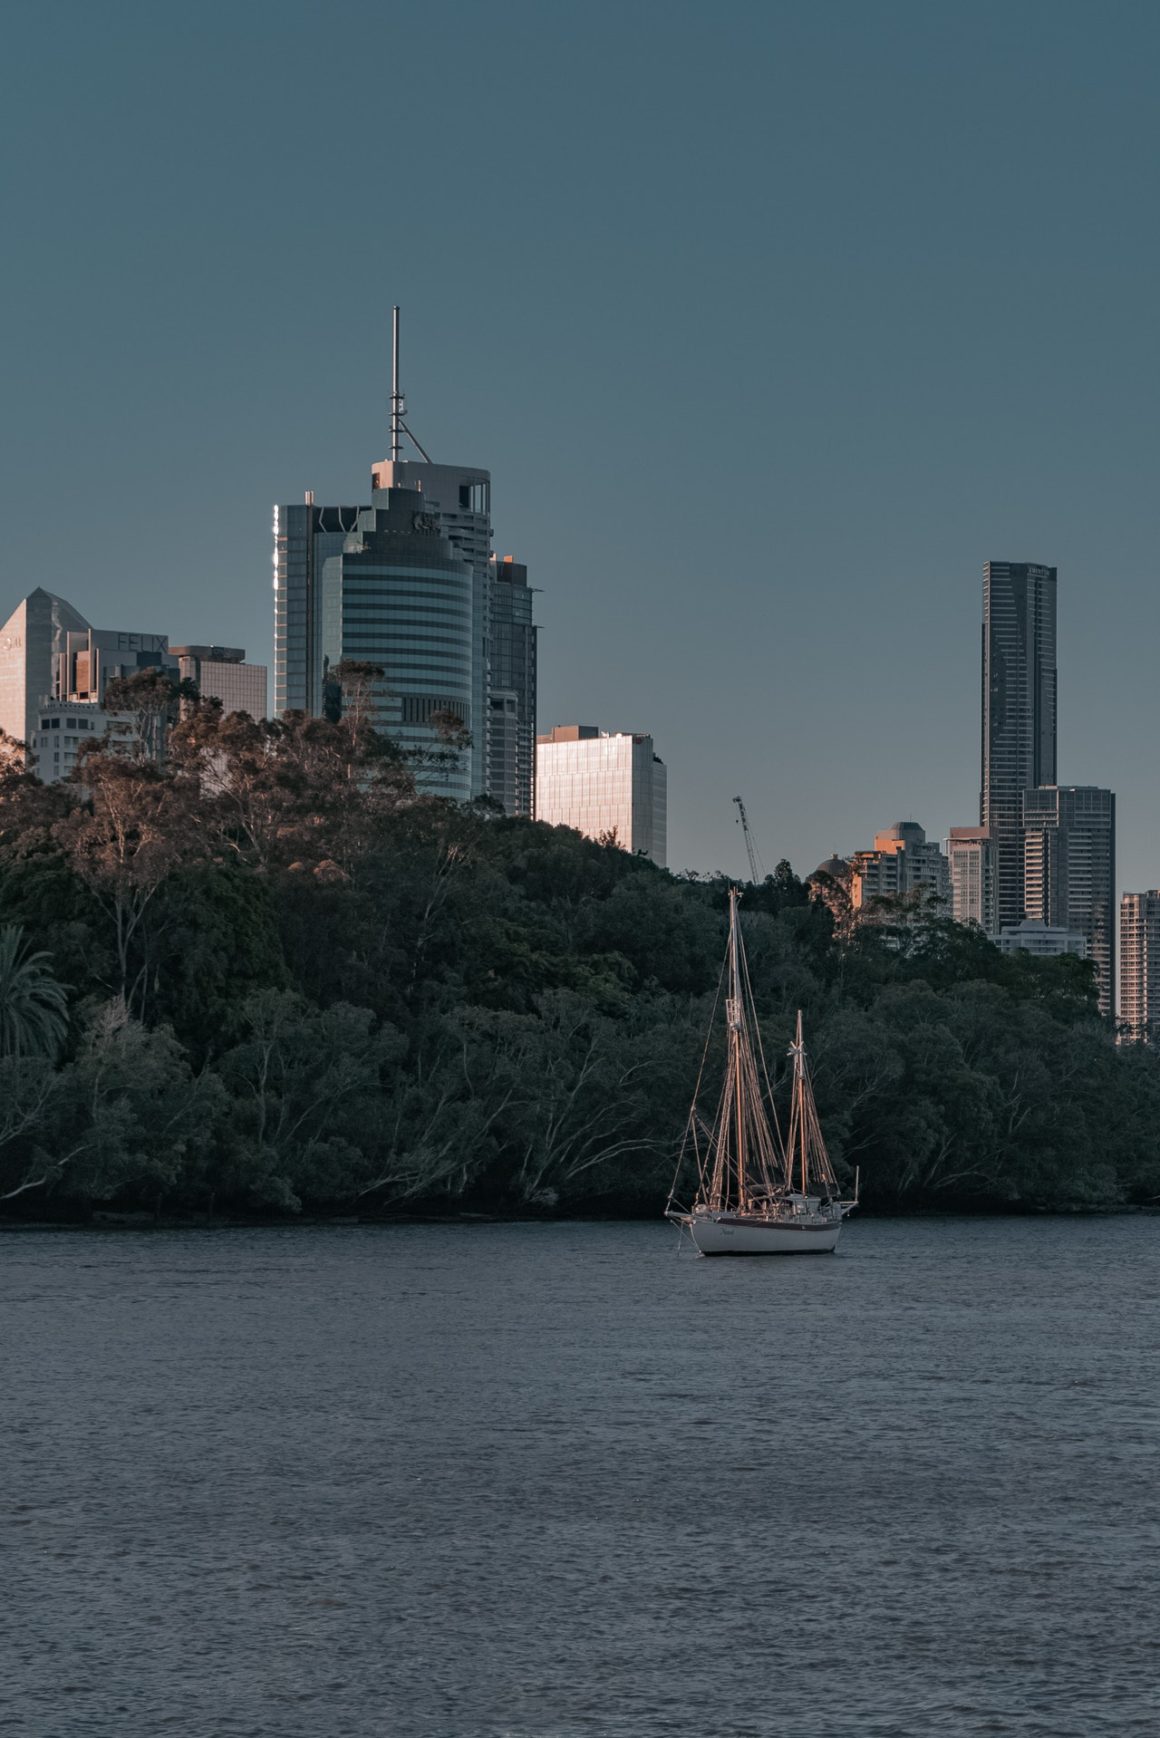 A sailboat sails in front of the city of Brisbane with famous towers of the Brisbane skyline behind it.